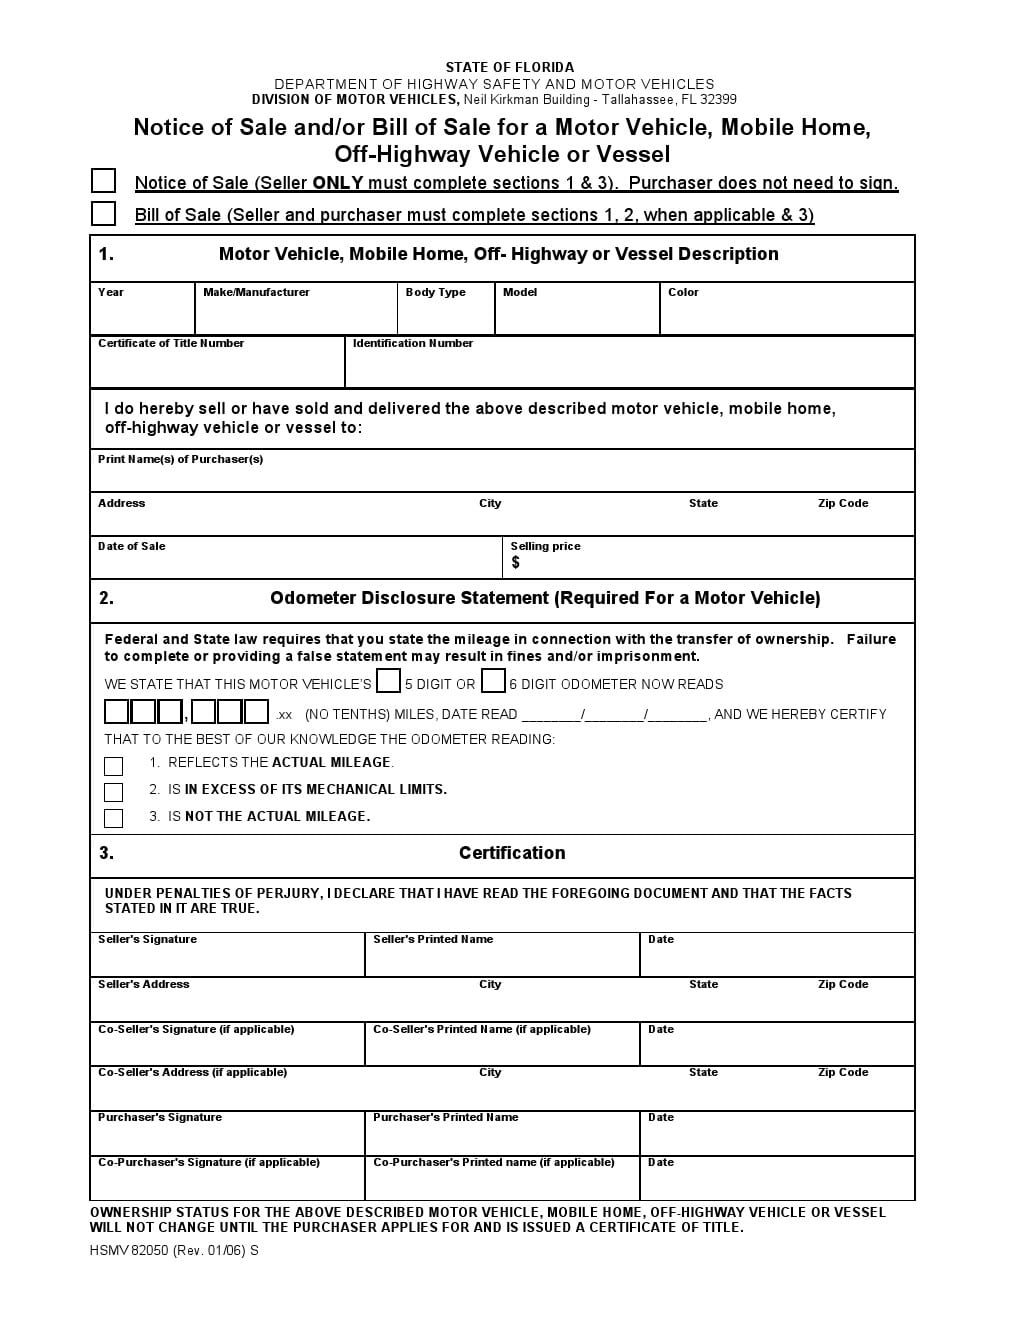 Download Free Bill of Sale Forms | Form Download